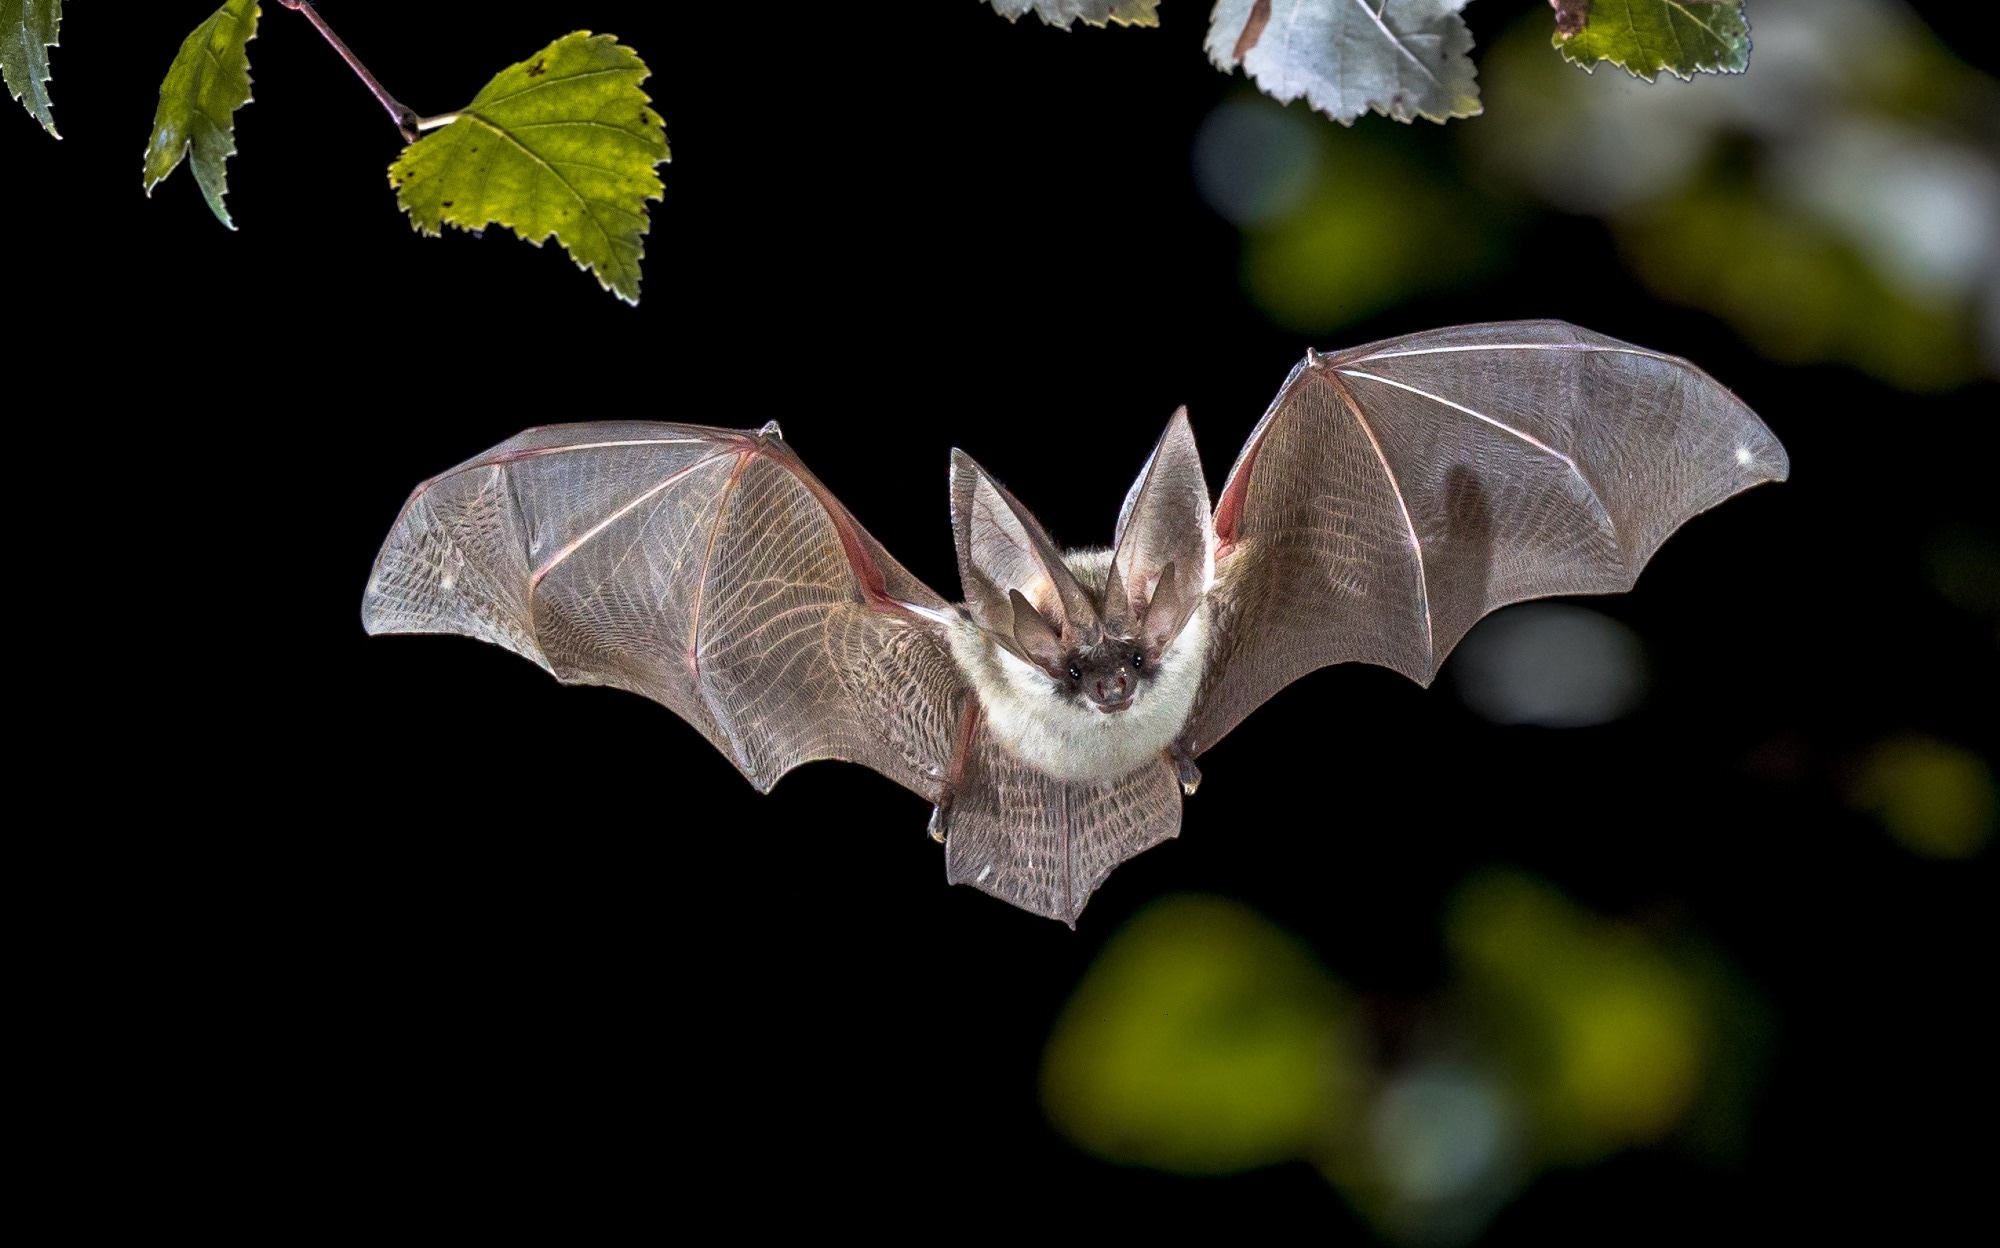 Study: Individual bat viromes reveal the co-infection, spillover and emergence risk of potential zoonotic viruses. Image Credit: Rudmer Zwerver/Shutterstock